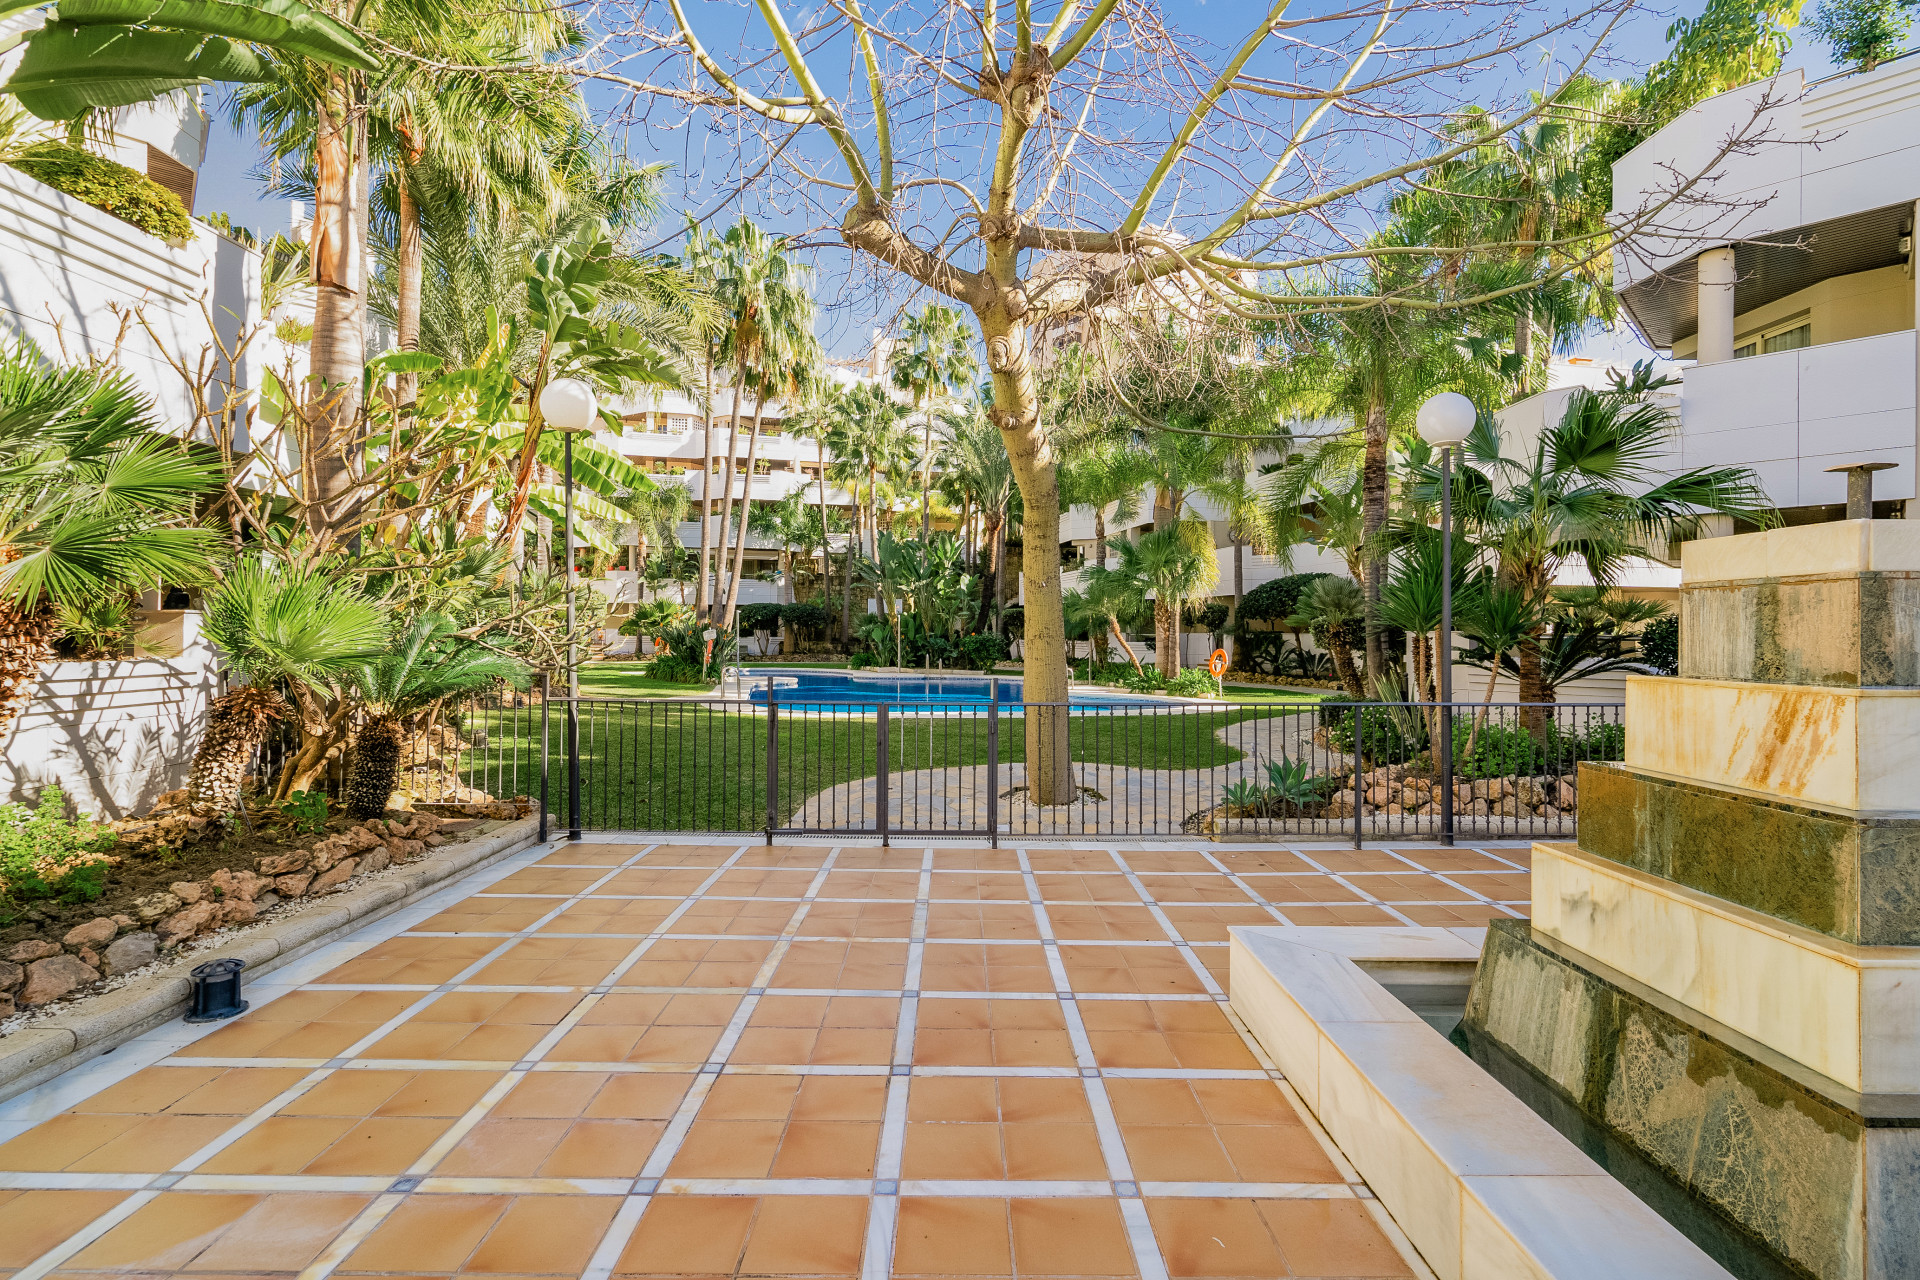 Exclusive Penthouse in popular Fuente Aloha Urbanization close to everything.